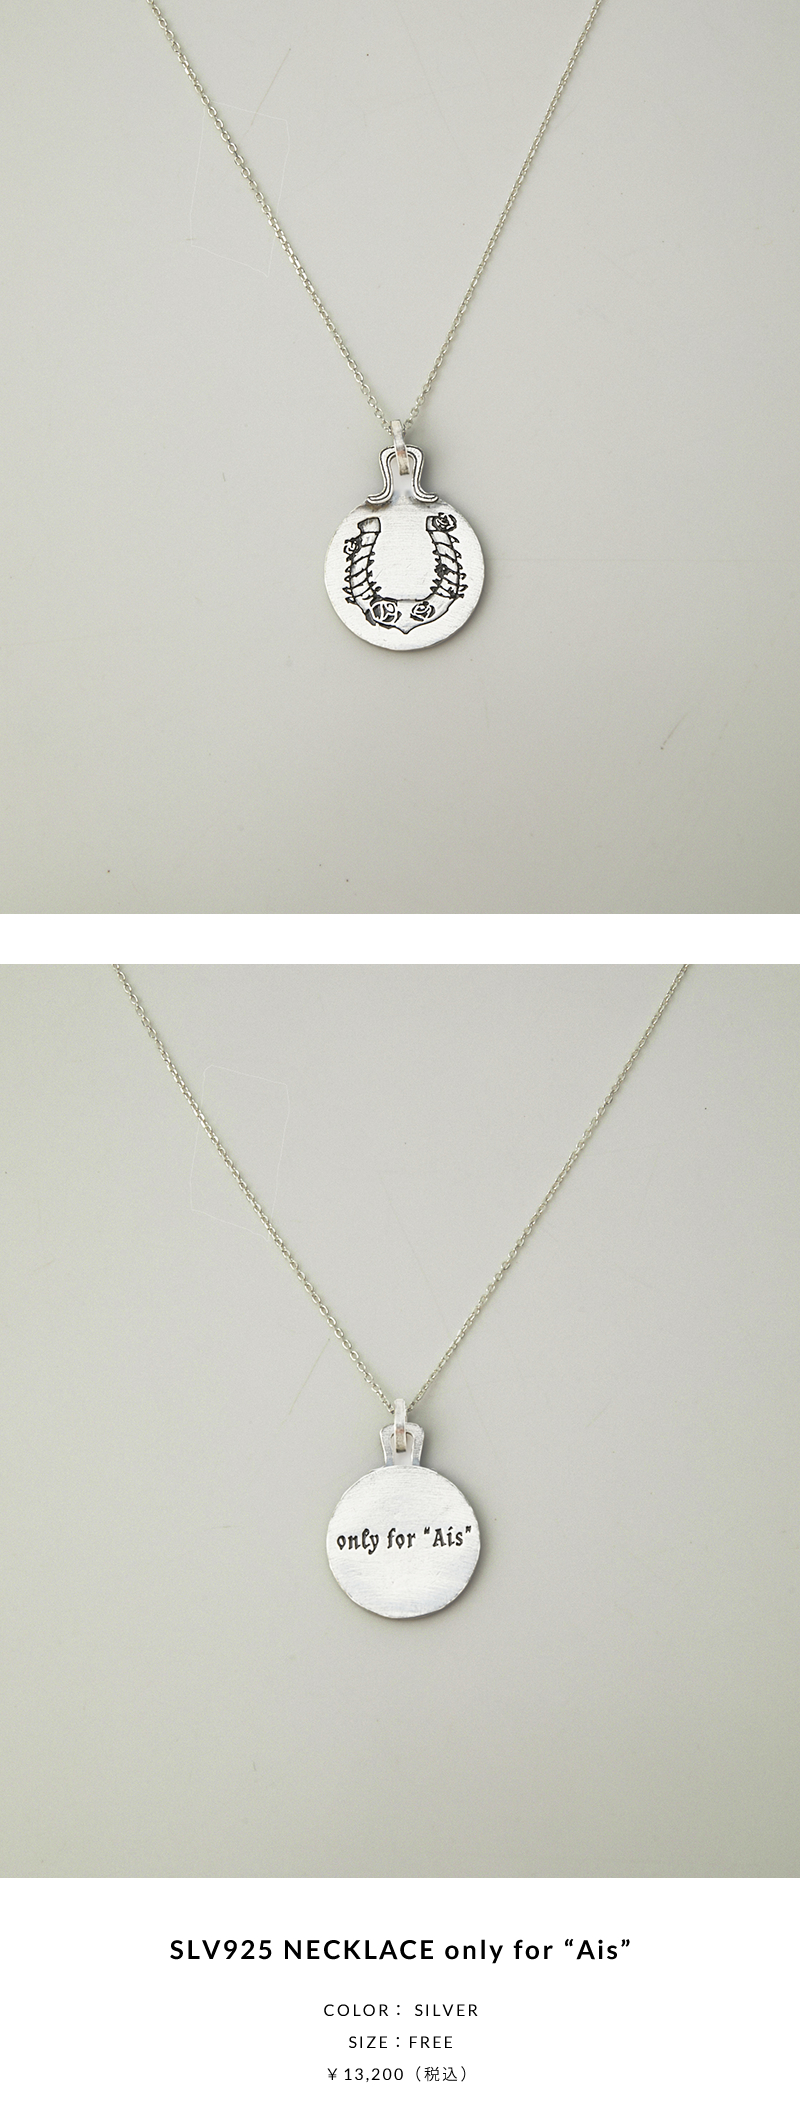 SLV925 NECKLACE only for "Ais"